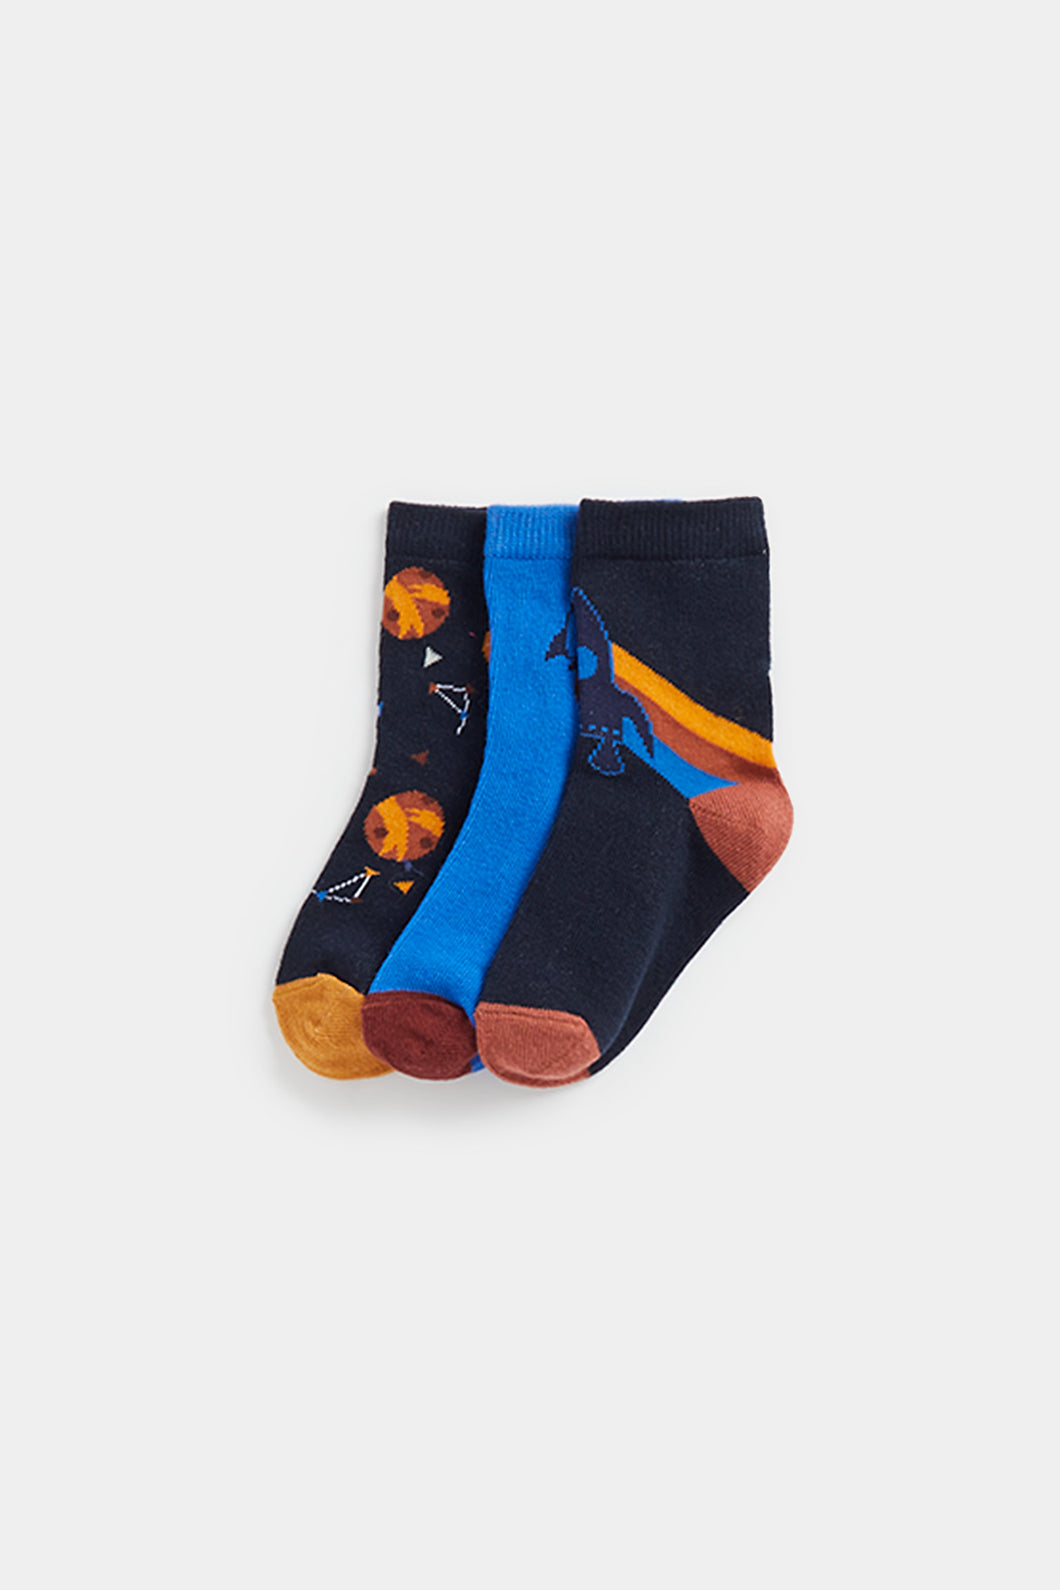 Mothercare Space Socks - 3 Pack